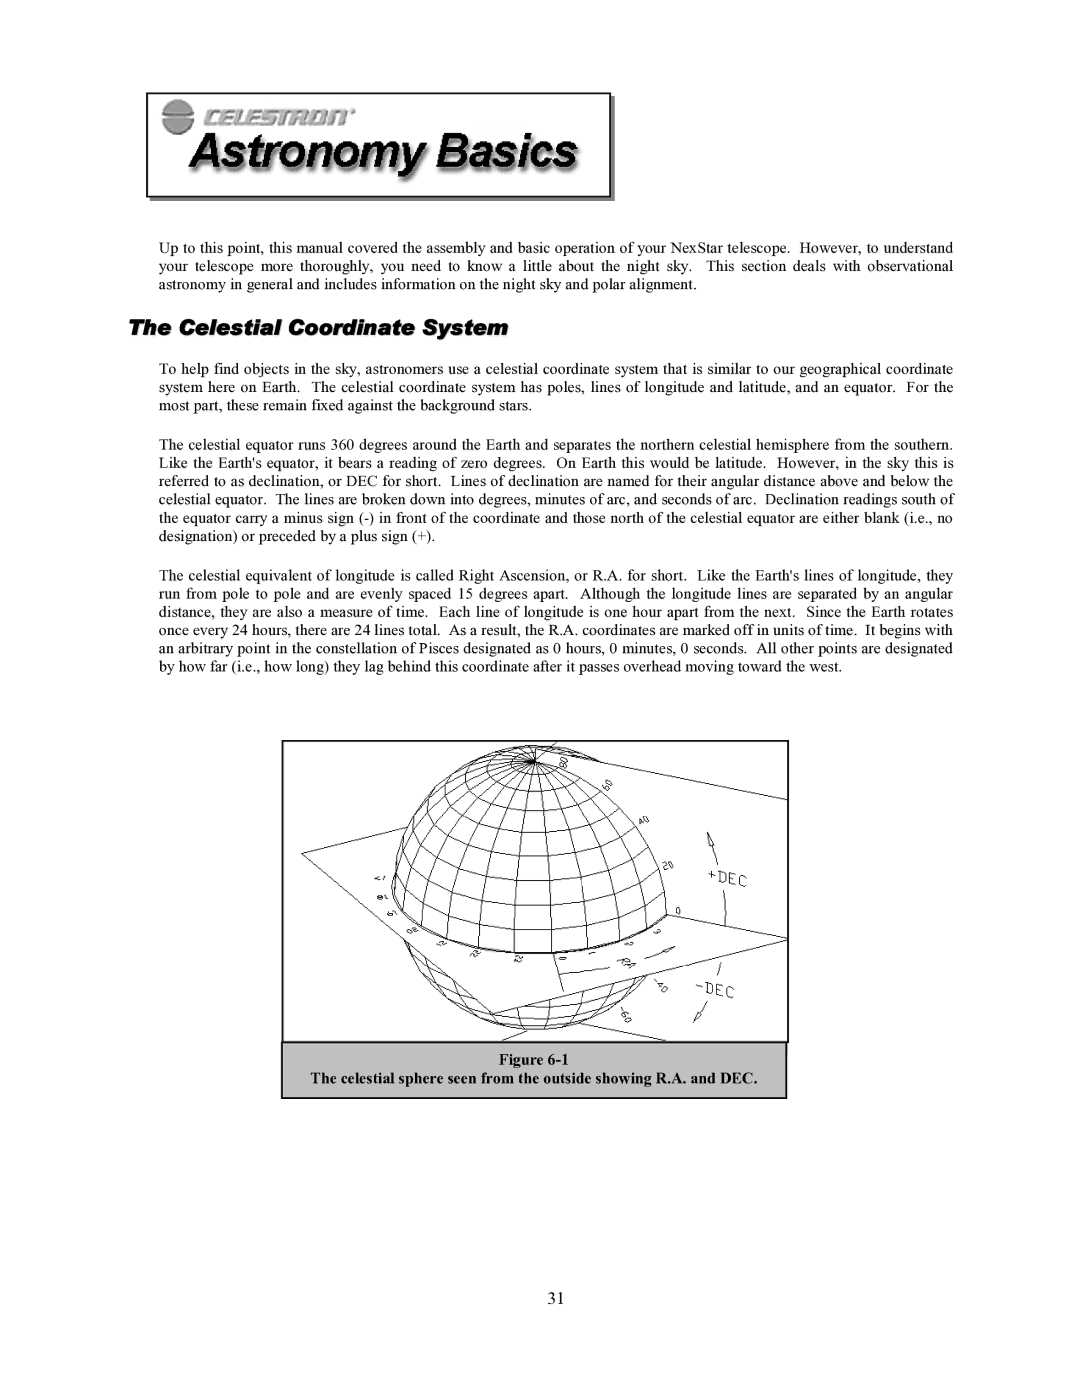 Celestron 93507 manual Celestial Coordinate System, Celestial sphere seen from the outside showing R.A. and DEC 